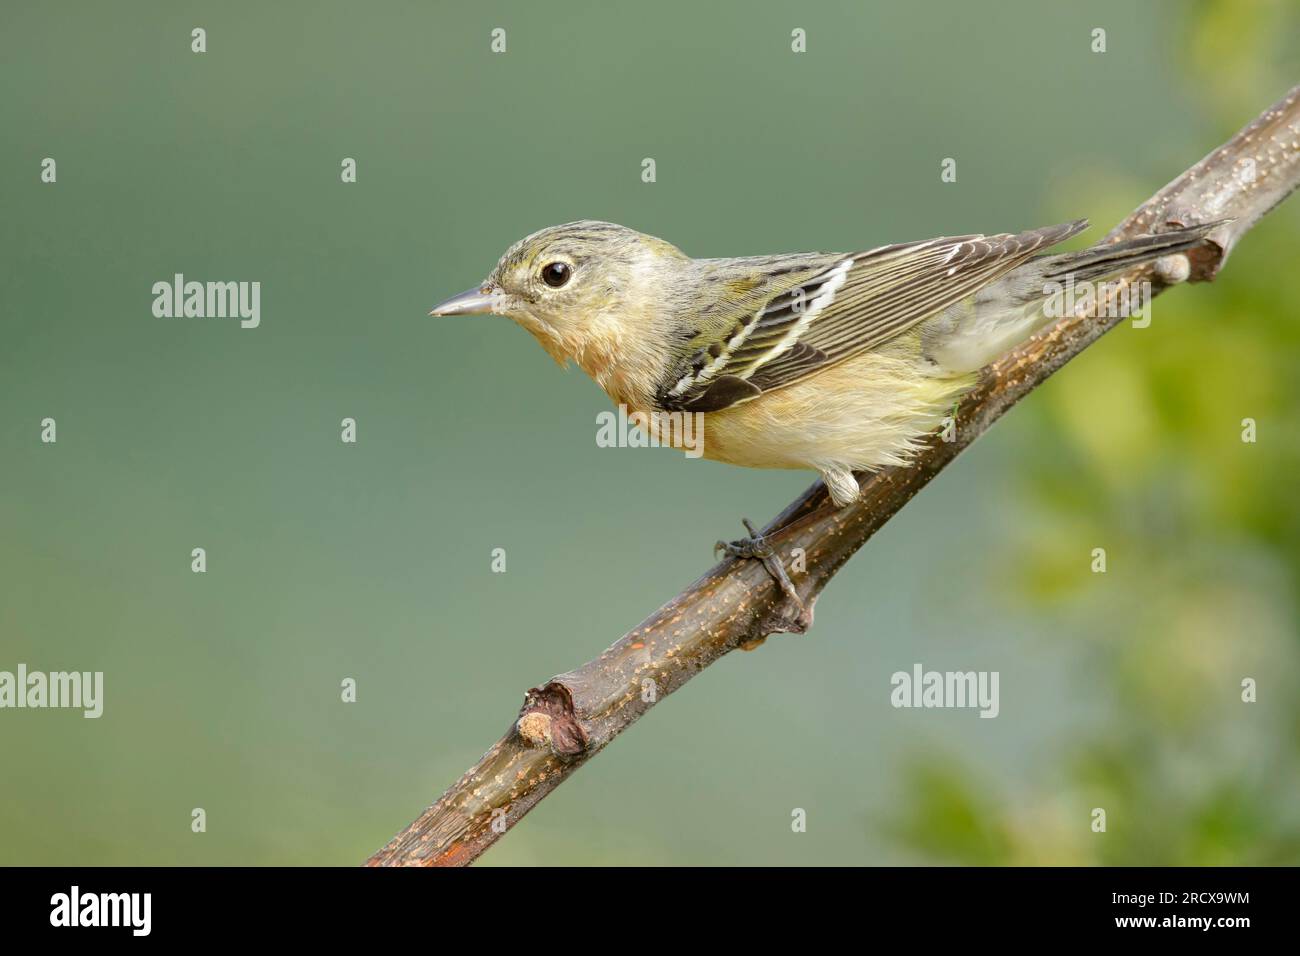 bay-breasted warbler (Setophaga castanea, Dendroica castanea), adult female perched on a branch, USA, Texas Stock Photo